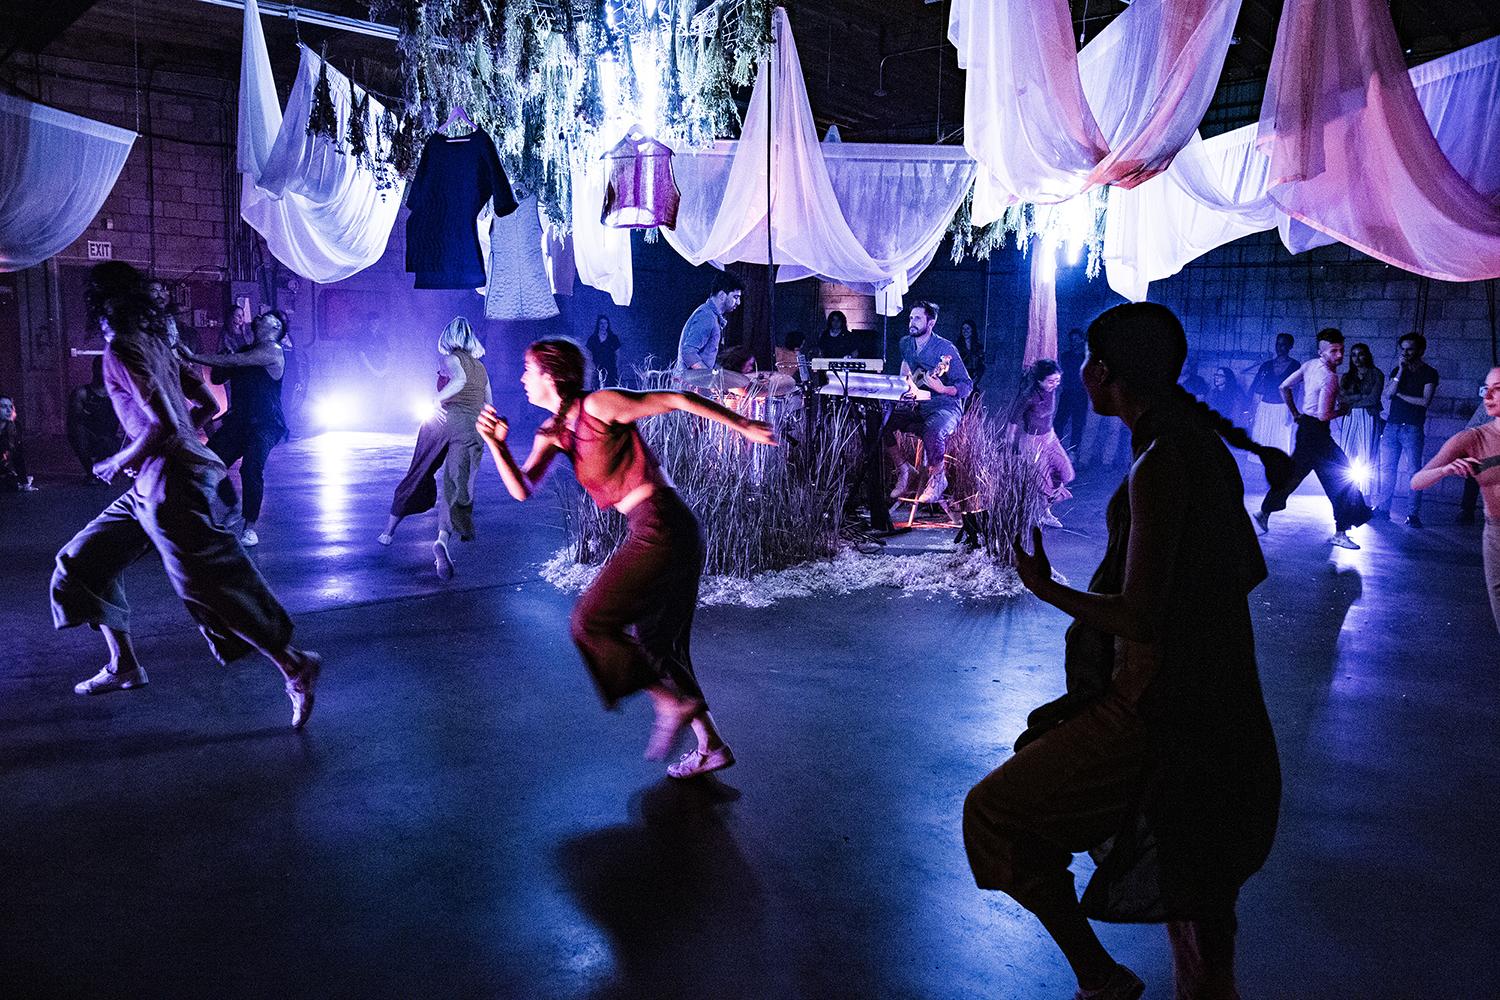 dancers running around musicians in a dark space with white drape hanging from the ceiling